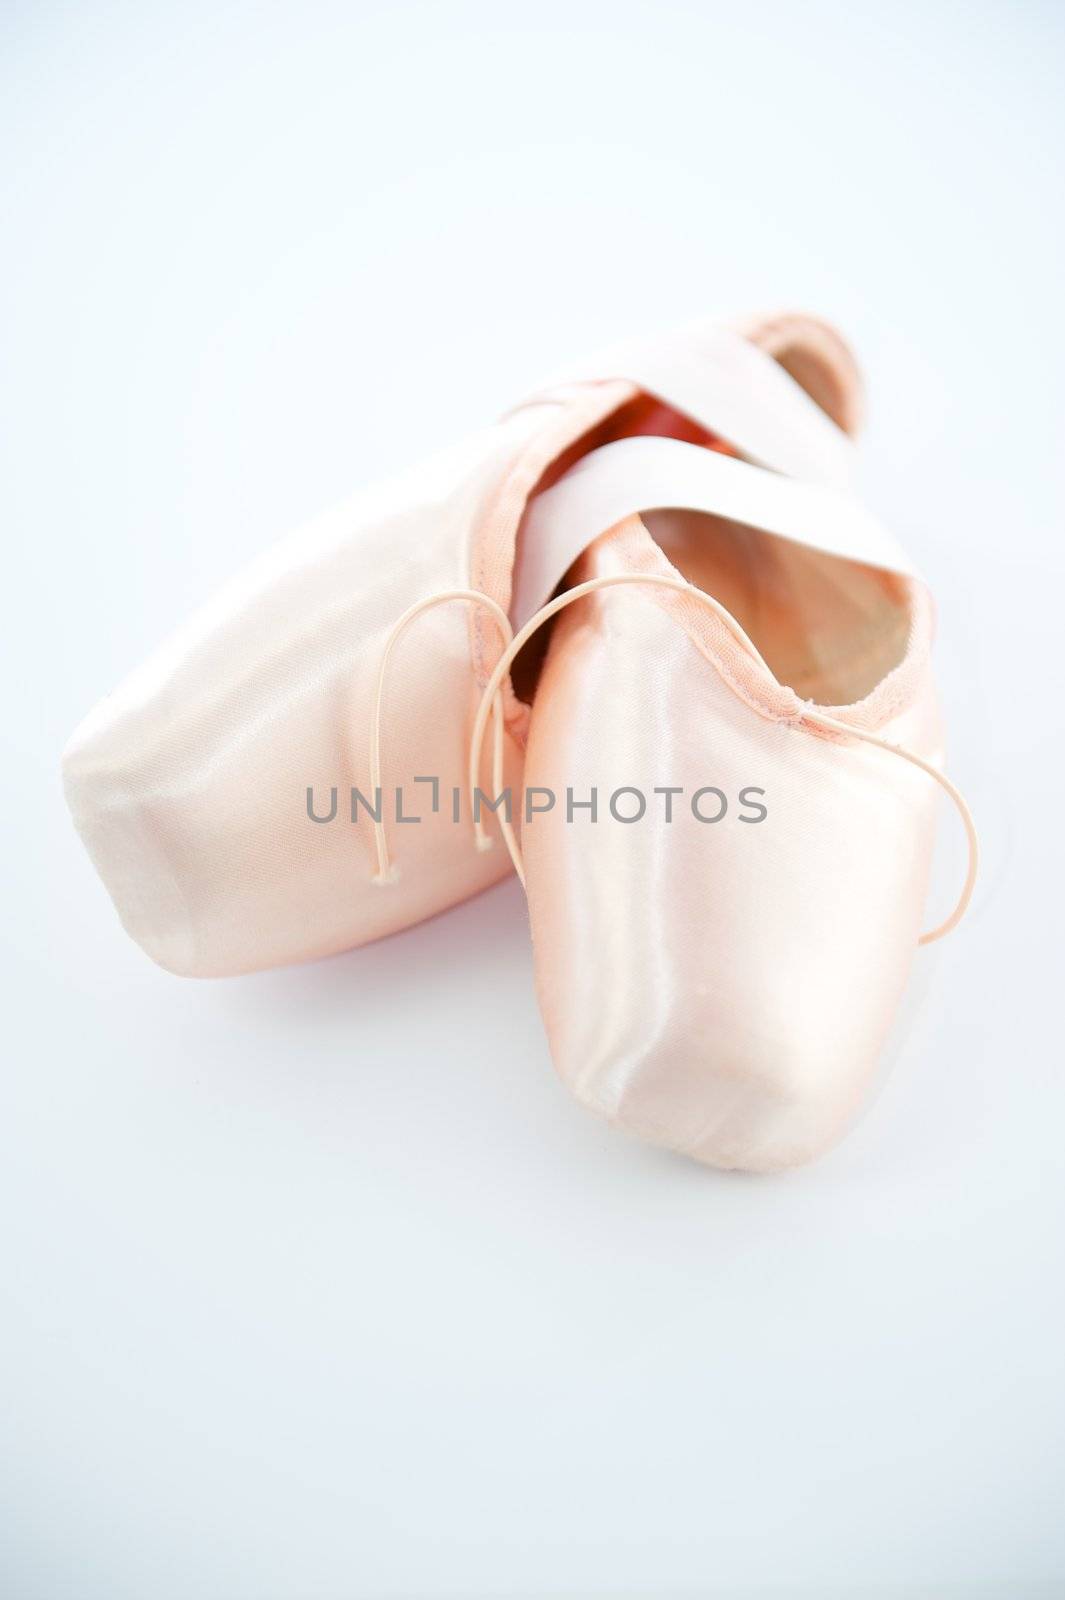 A pair light or pale pink ballet point shoes or slippers isolated on a white background with a lot of copyspace